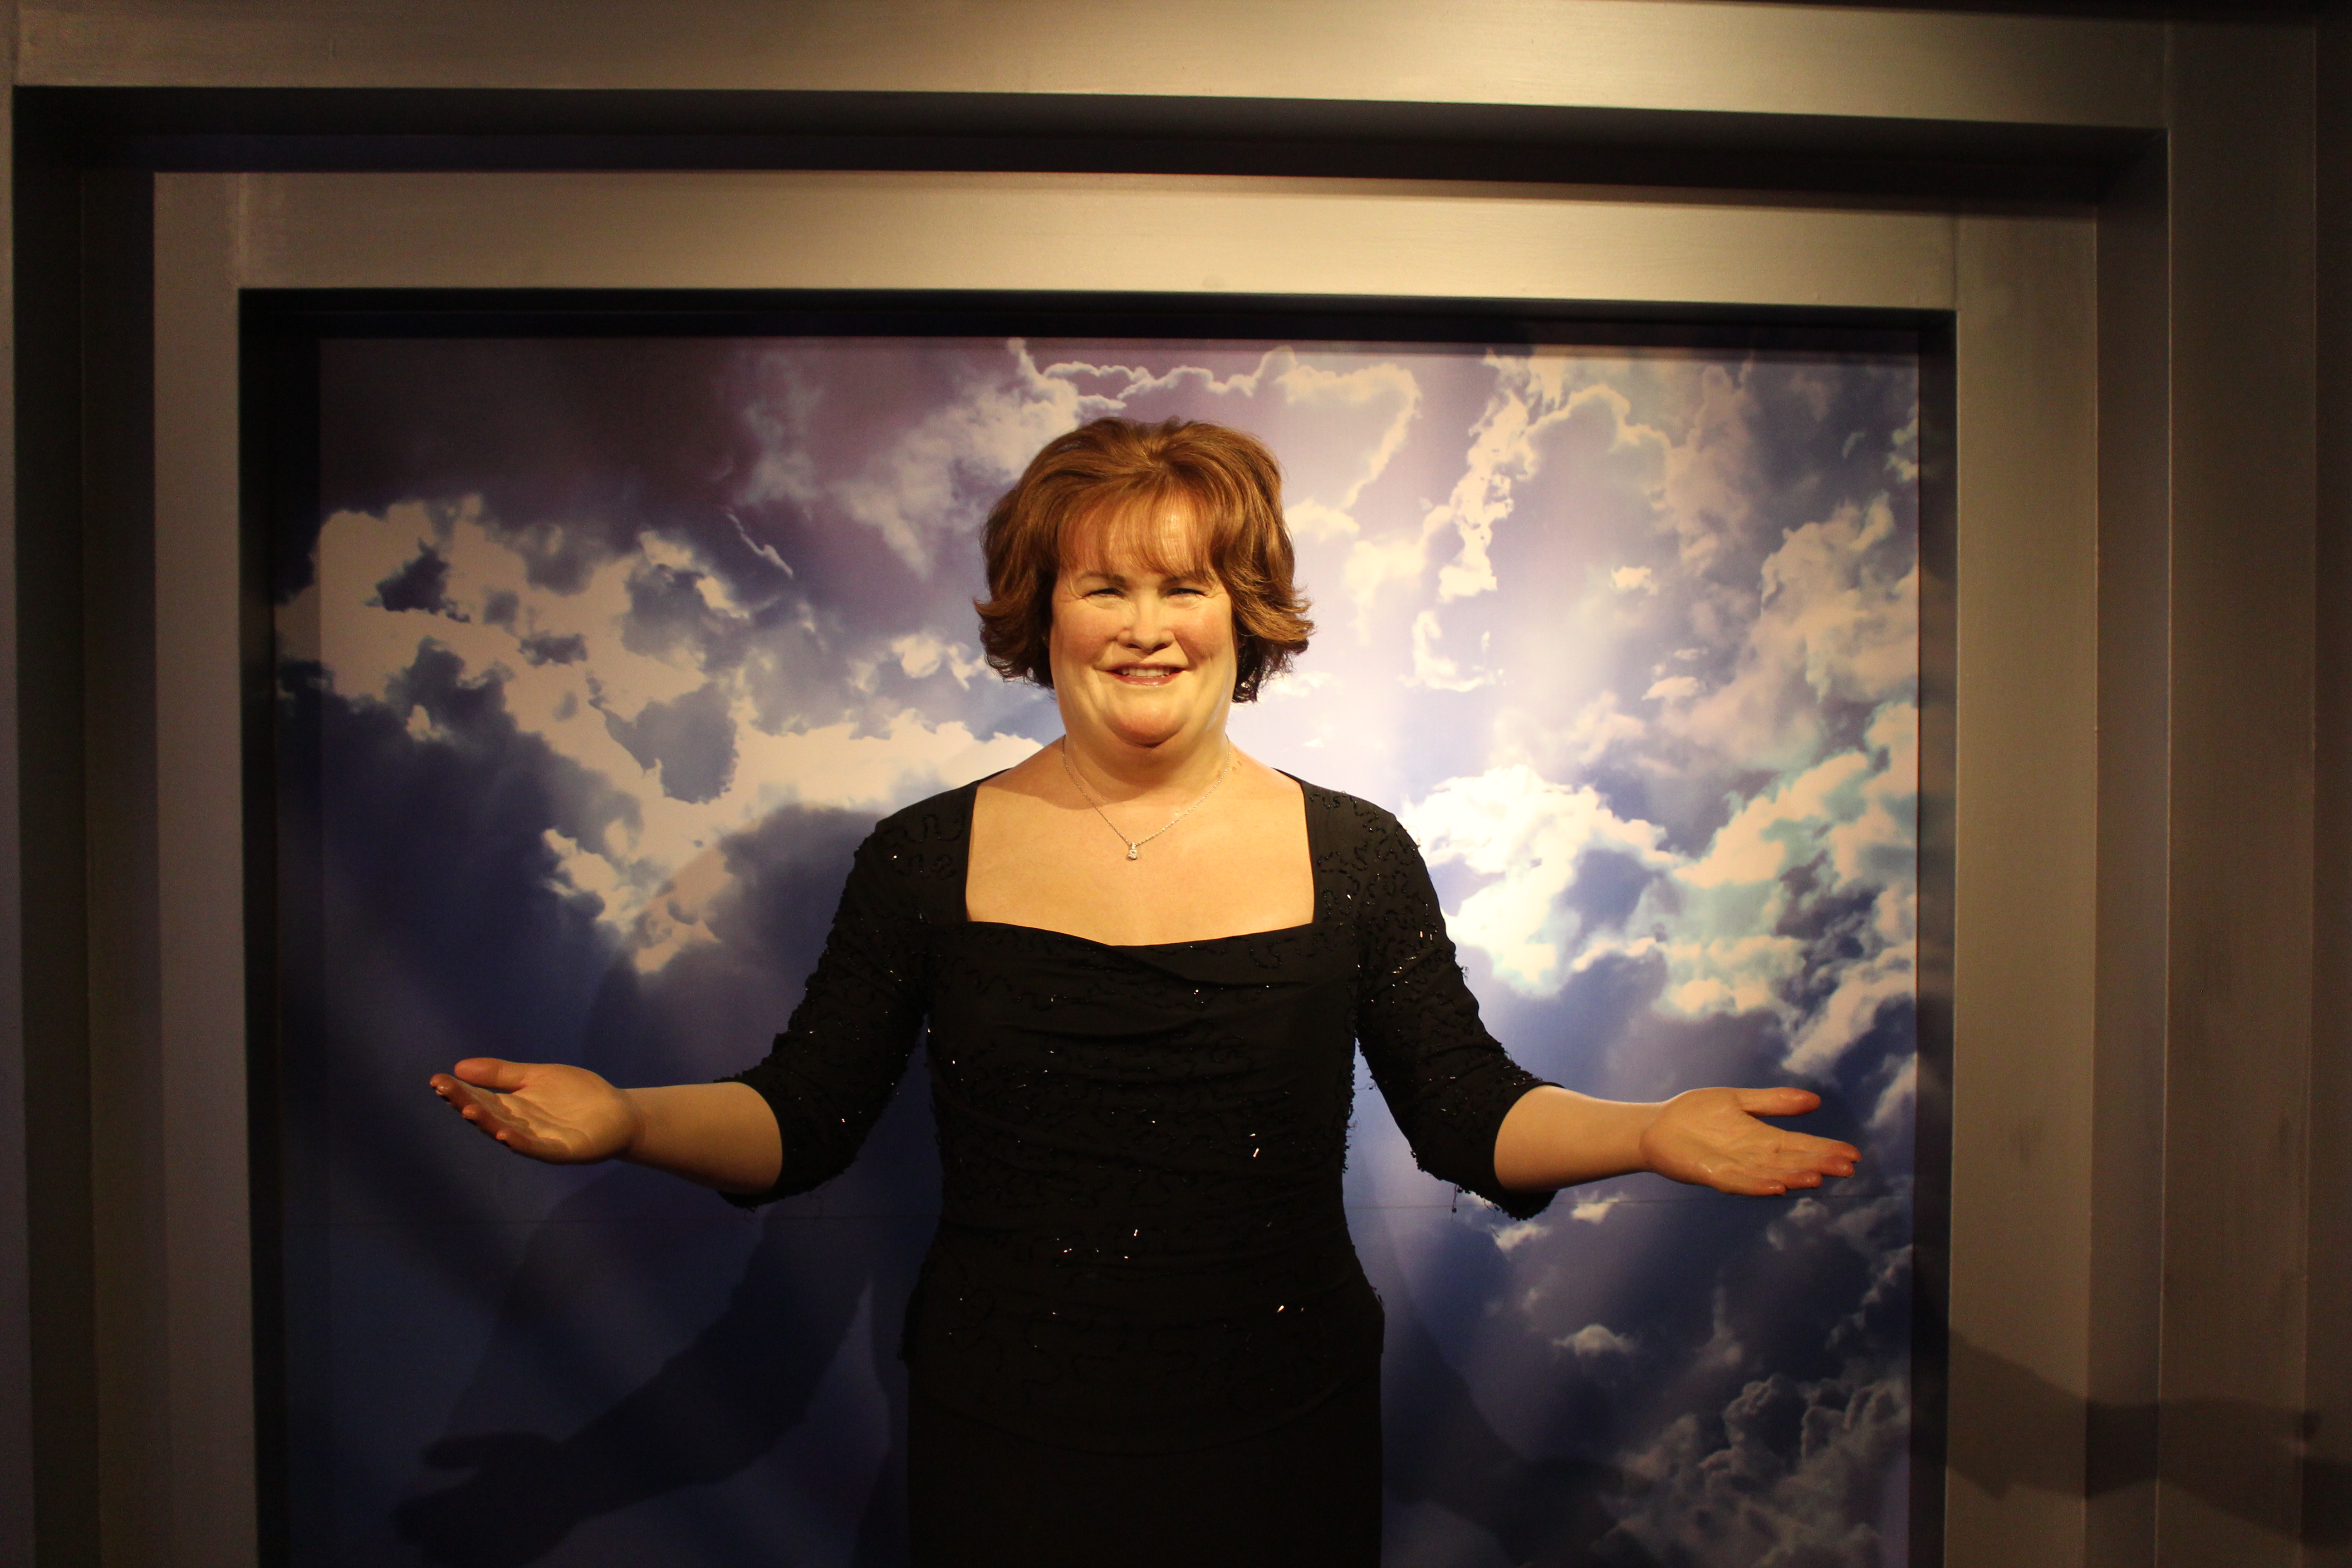 Susan Boyle's wax figure with her arms out at Madame Tussauds Blackpool